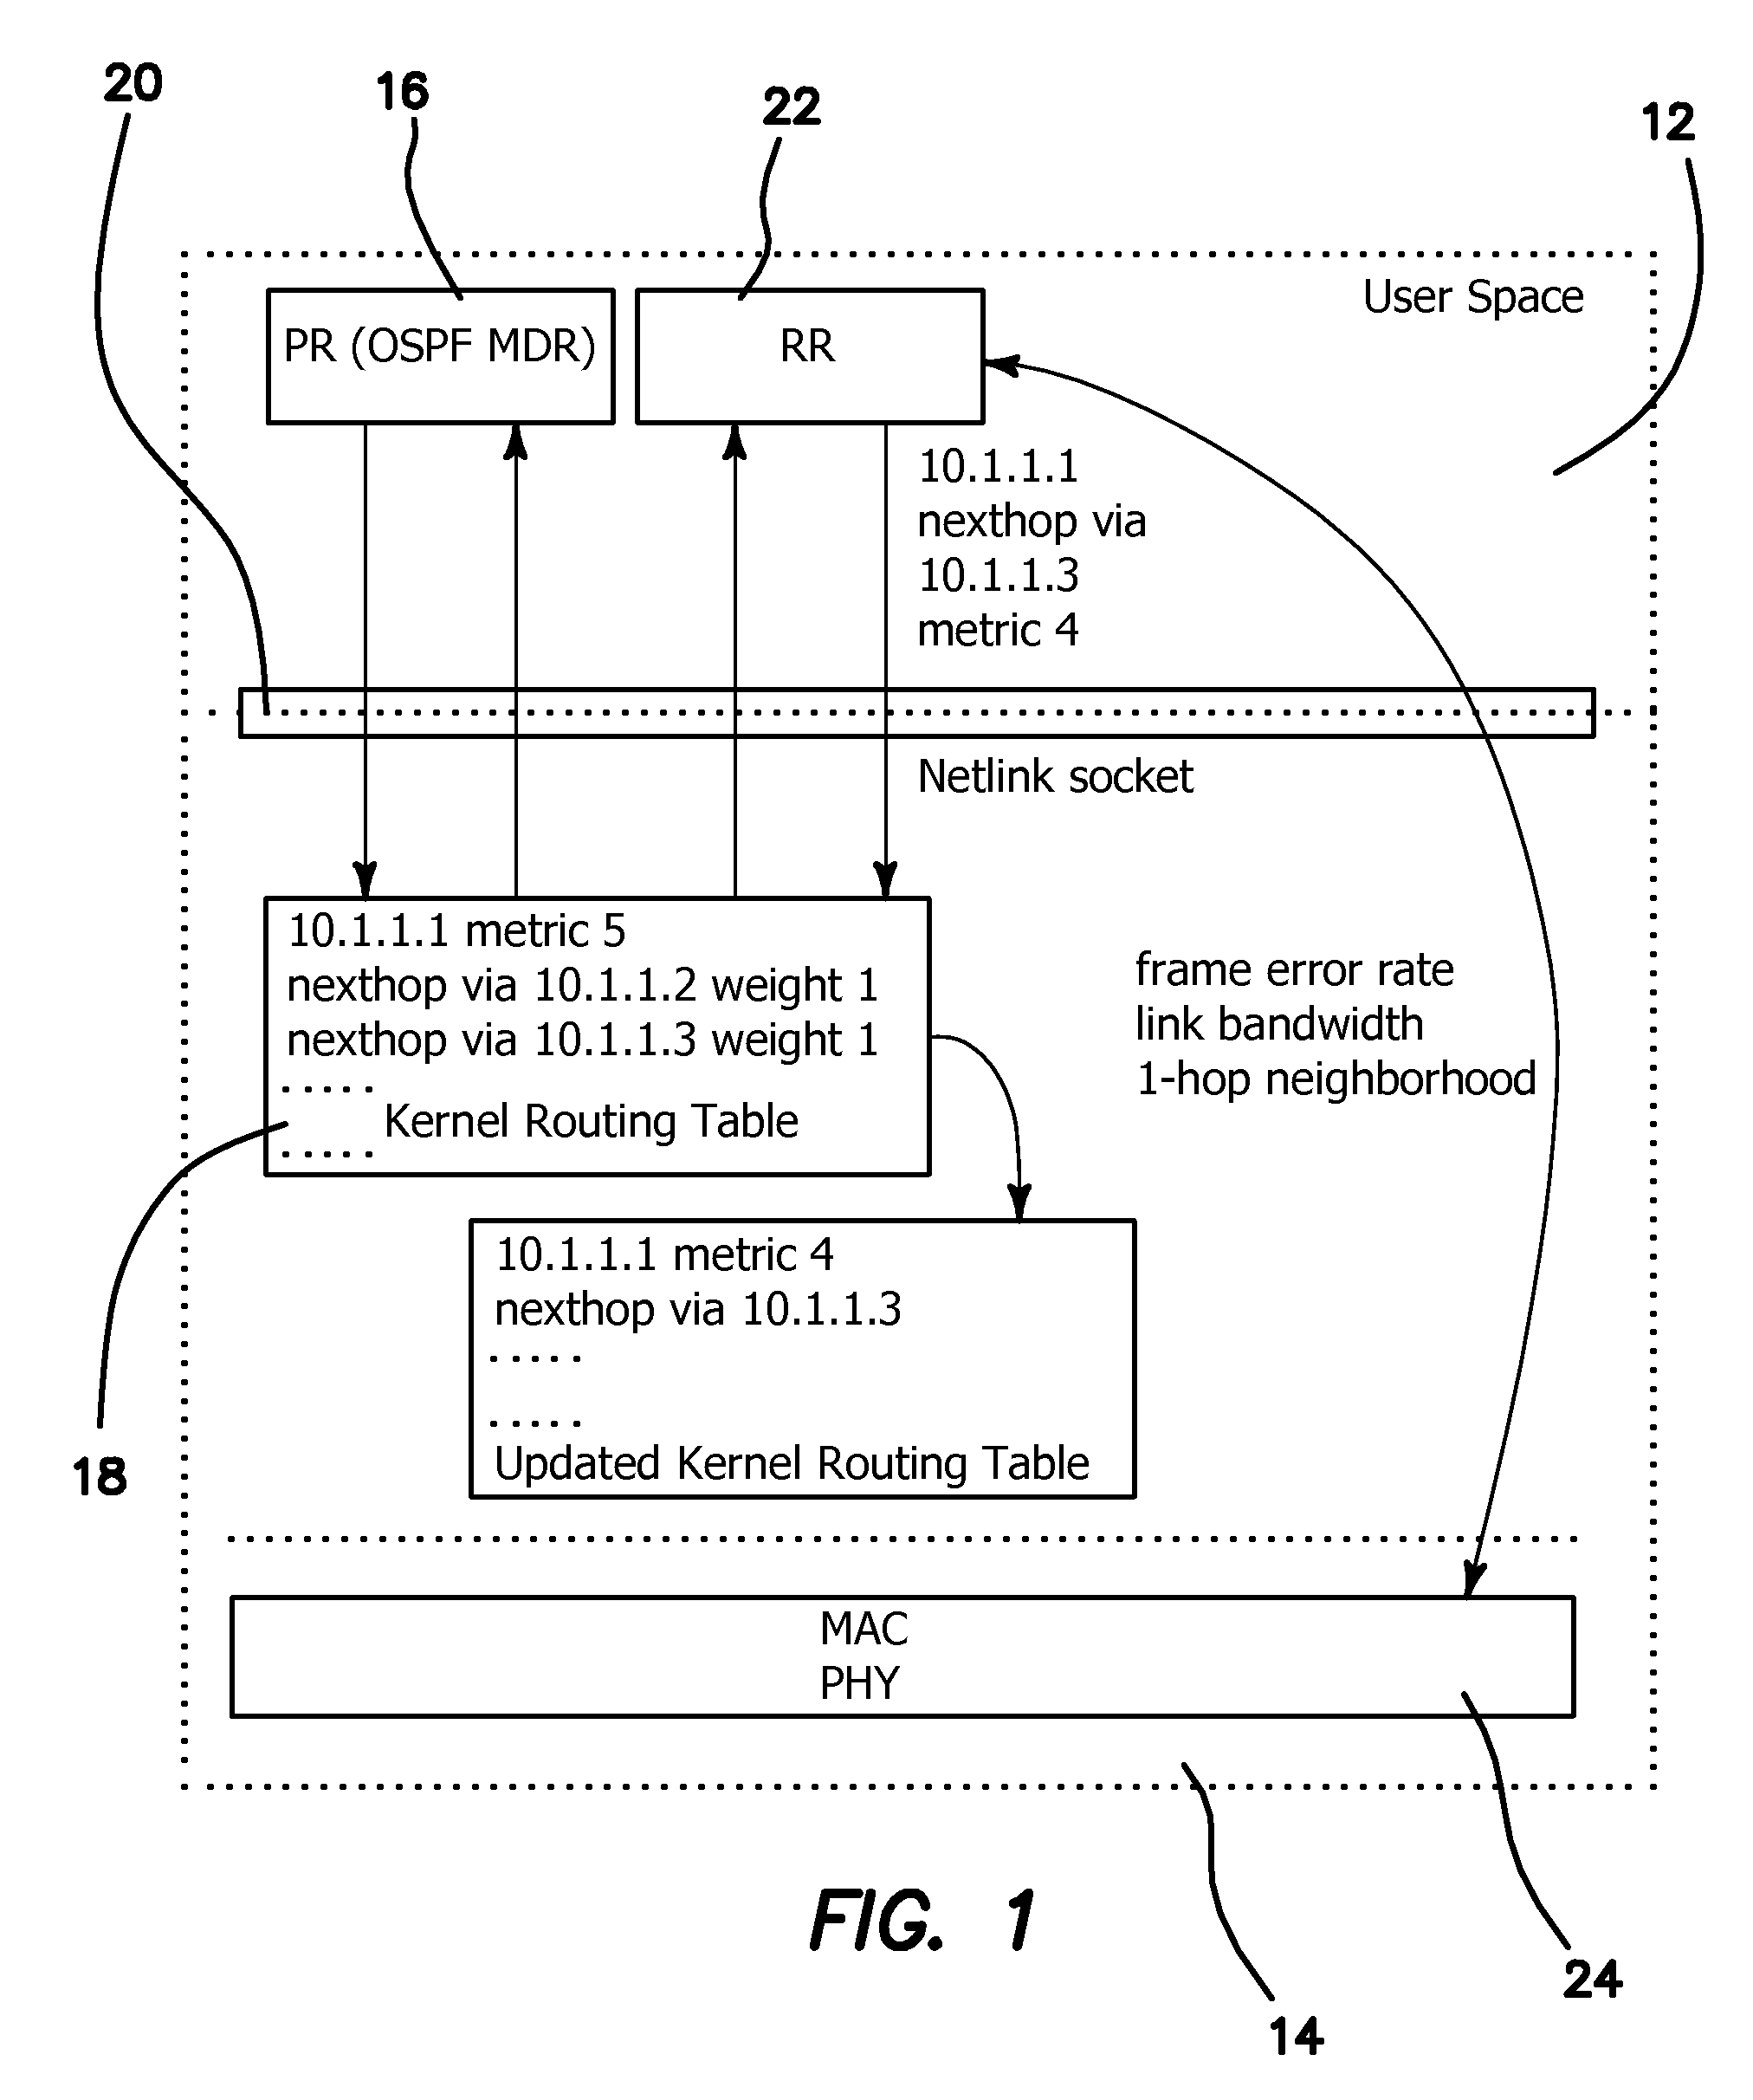 Hybrid Cross-Layer Routing Protocol for MANETs